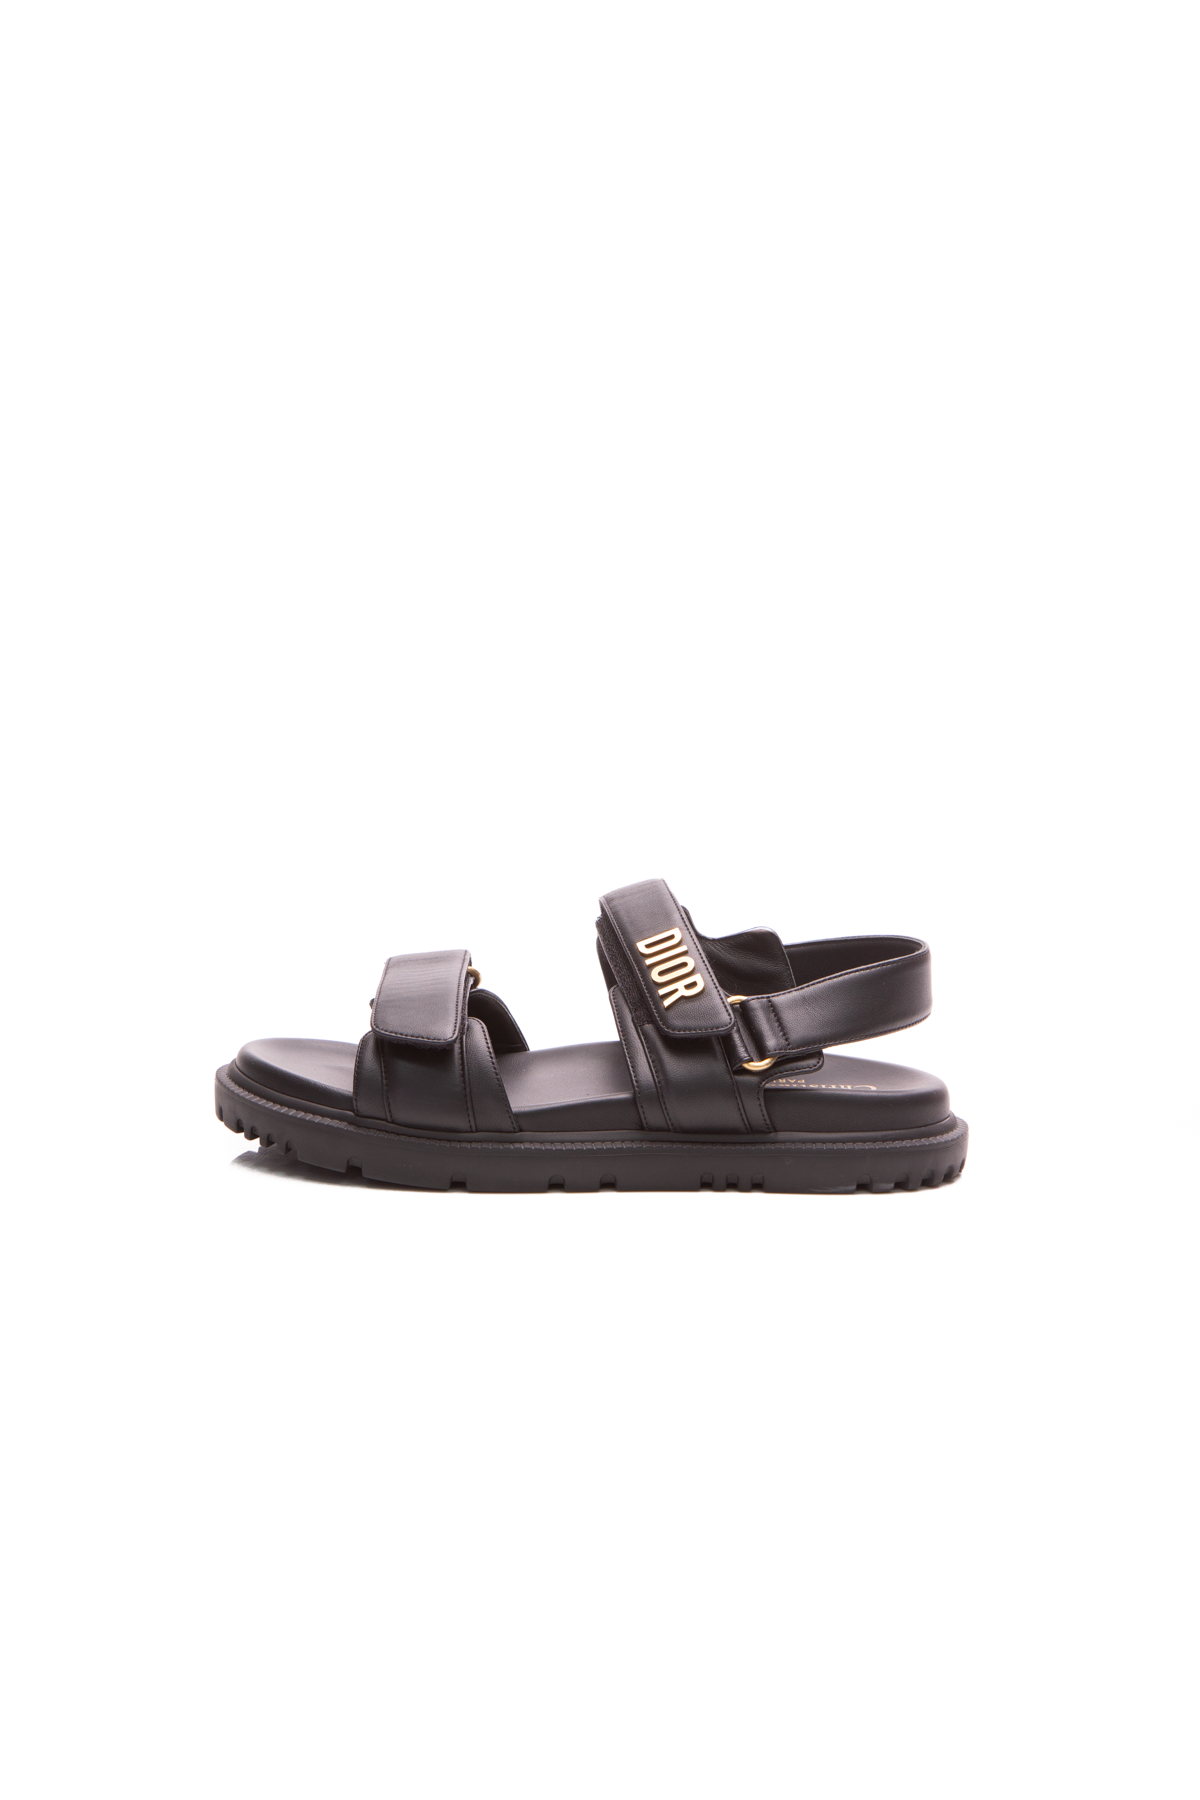 Please who knows where I can purchase these LV Foch Mule sandals in a size  44? : r/Louisvuitton